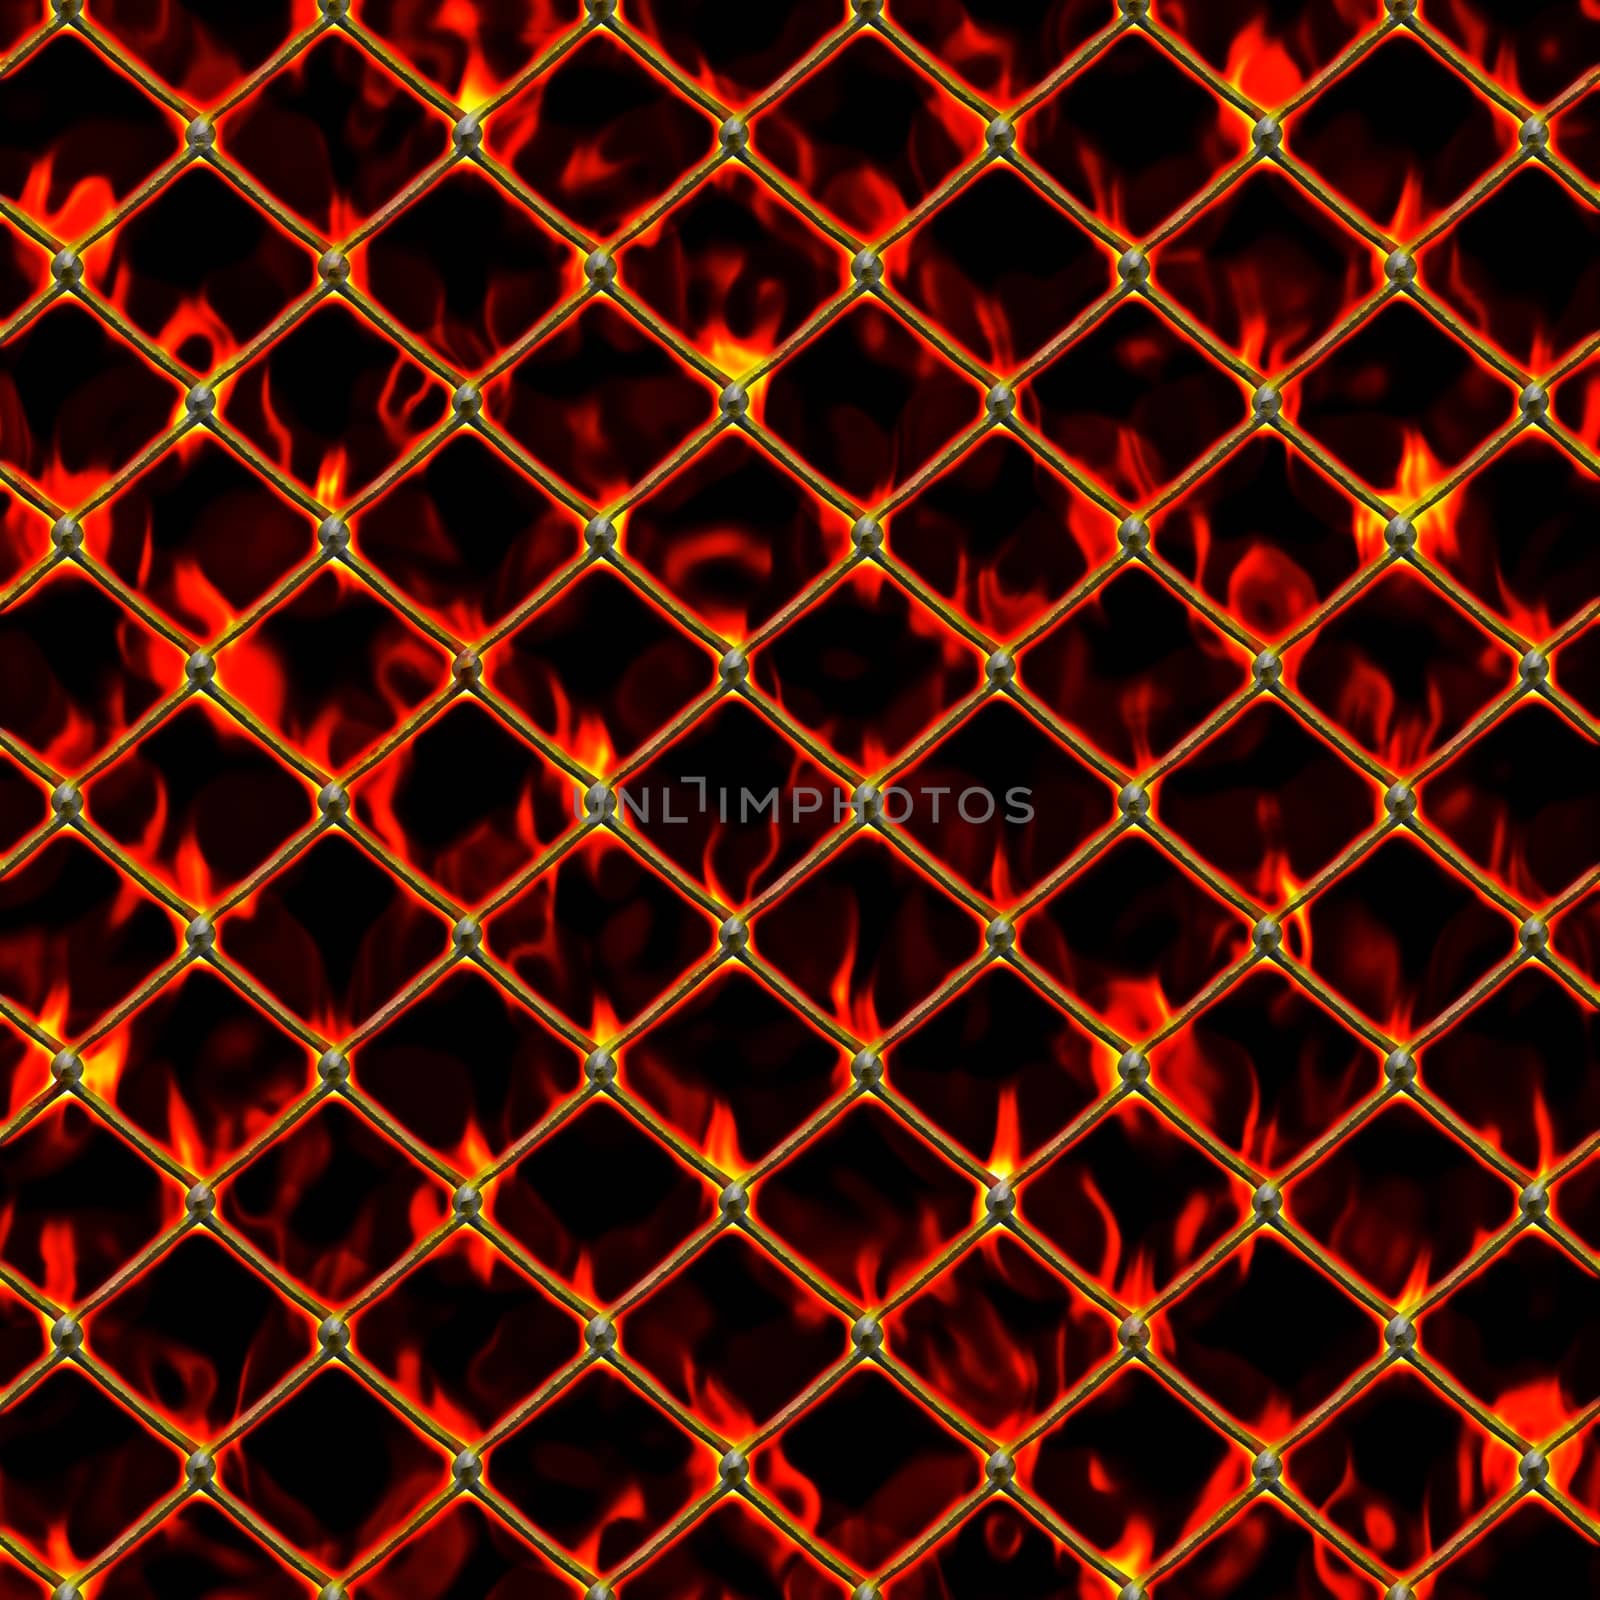 Burning Chain Link by ankarb